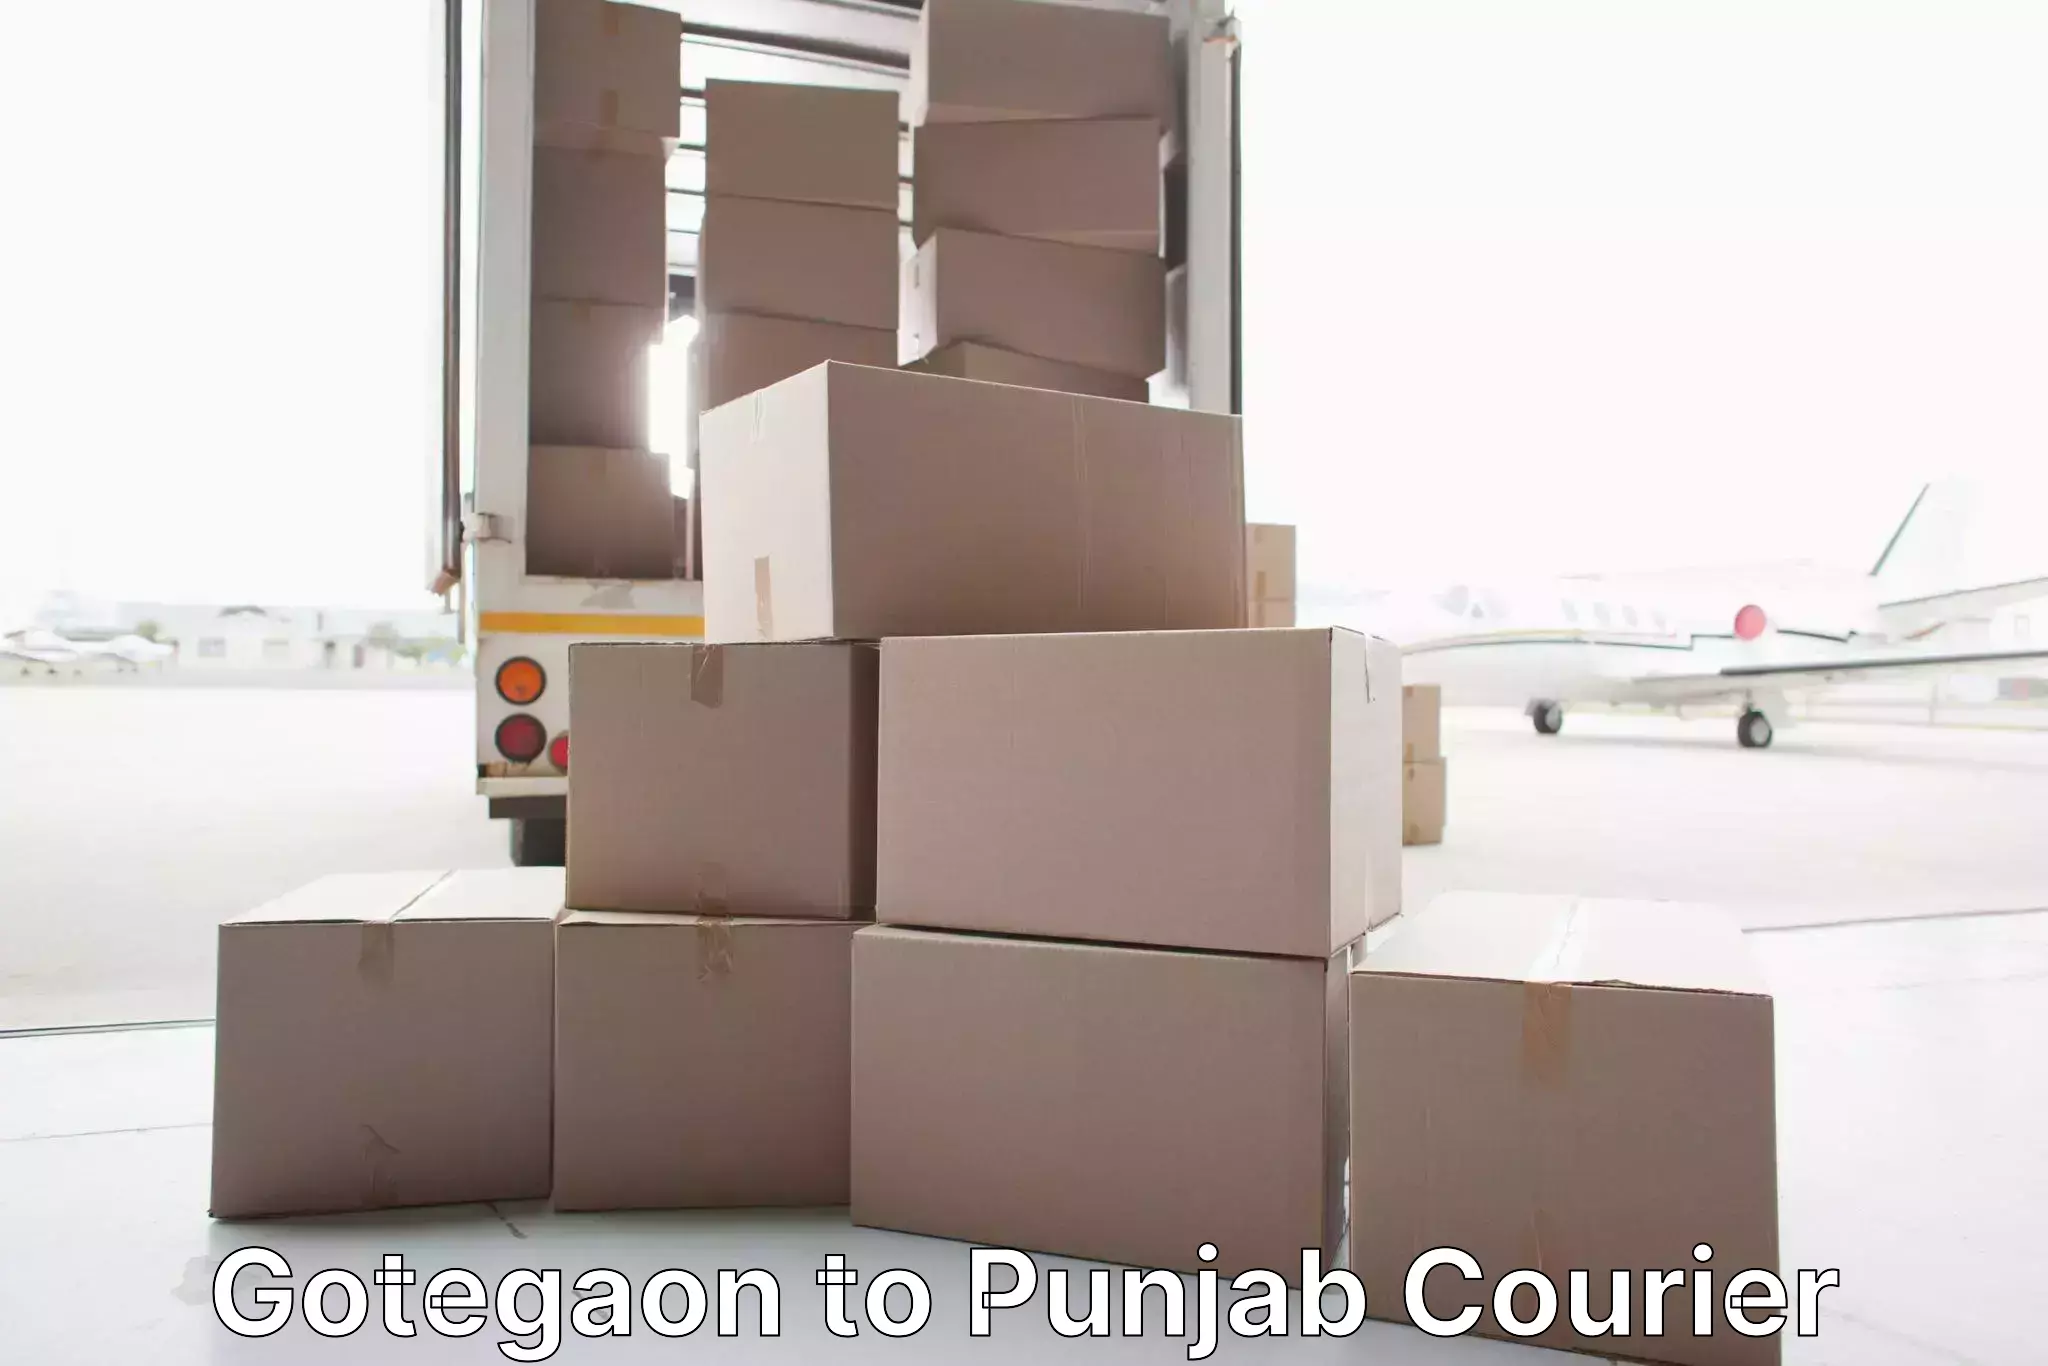 Furniture relocation services Gotegaon to Mehta Chowk